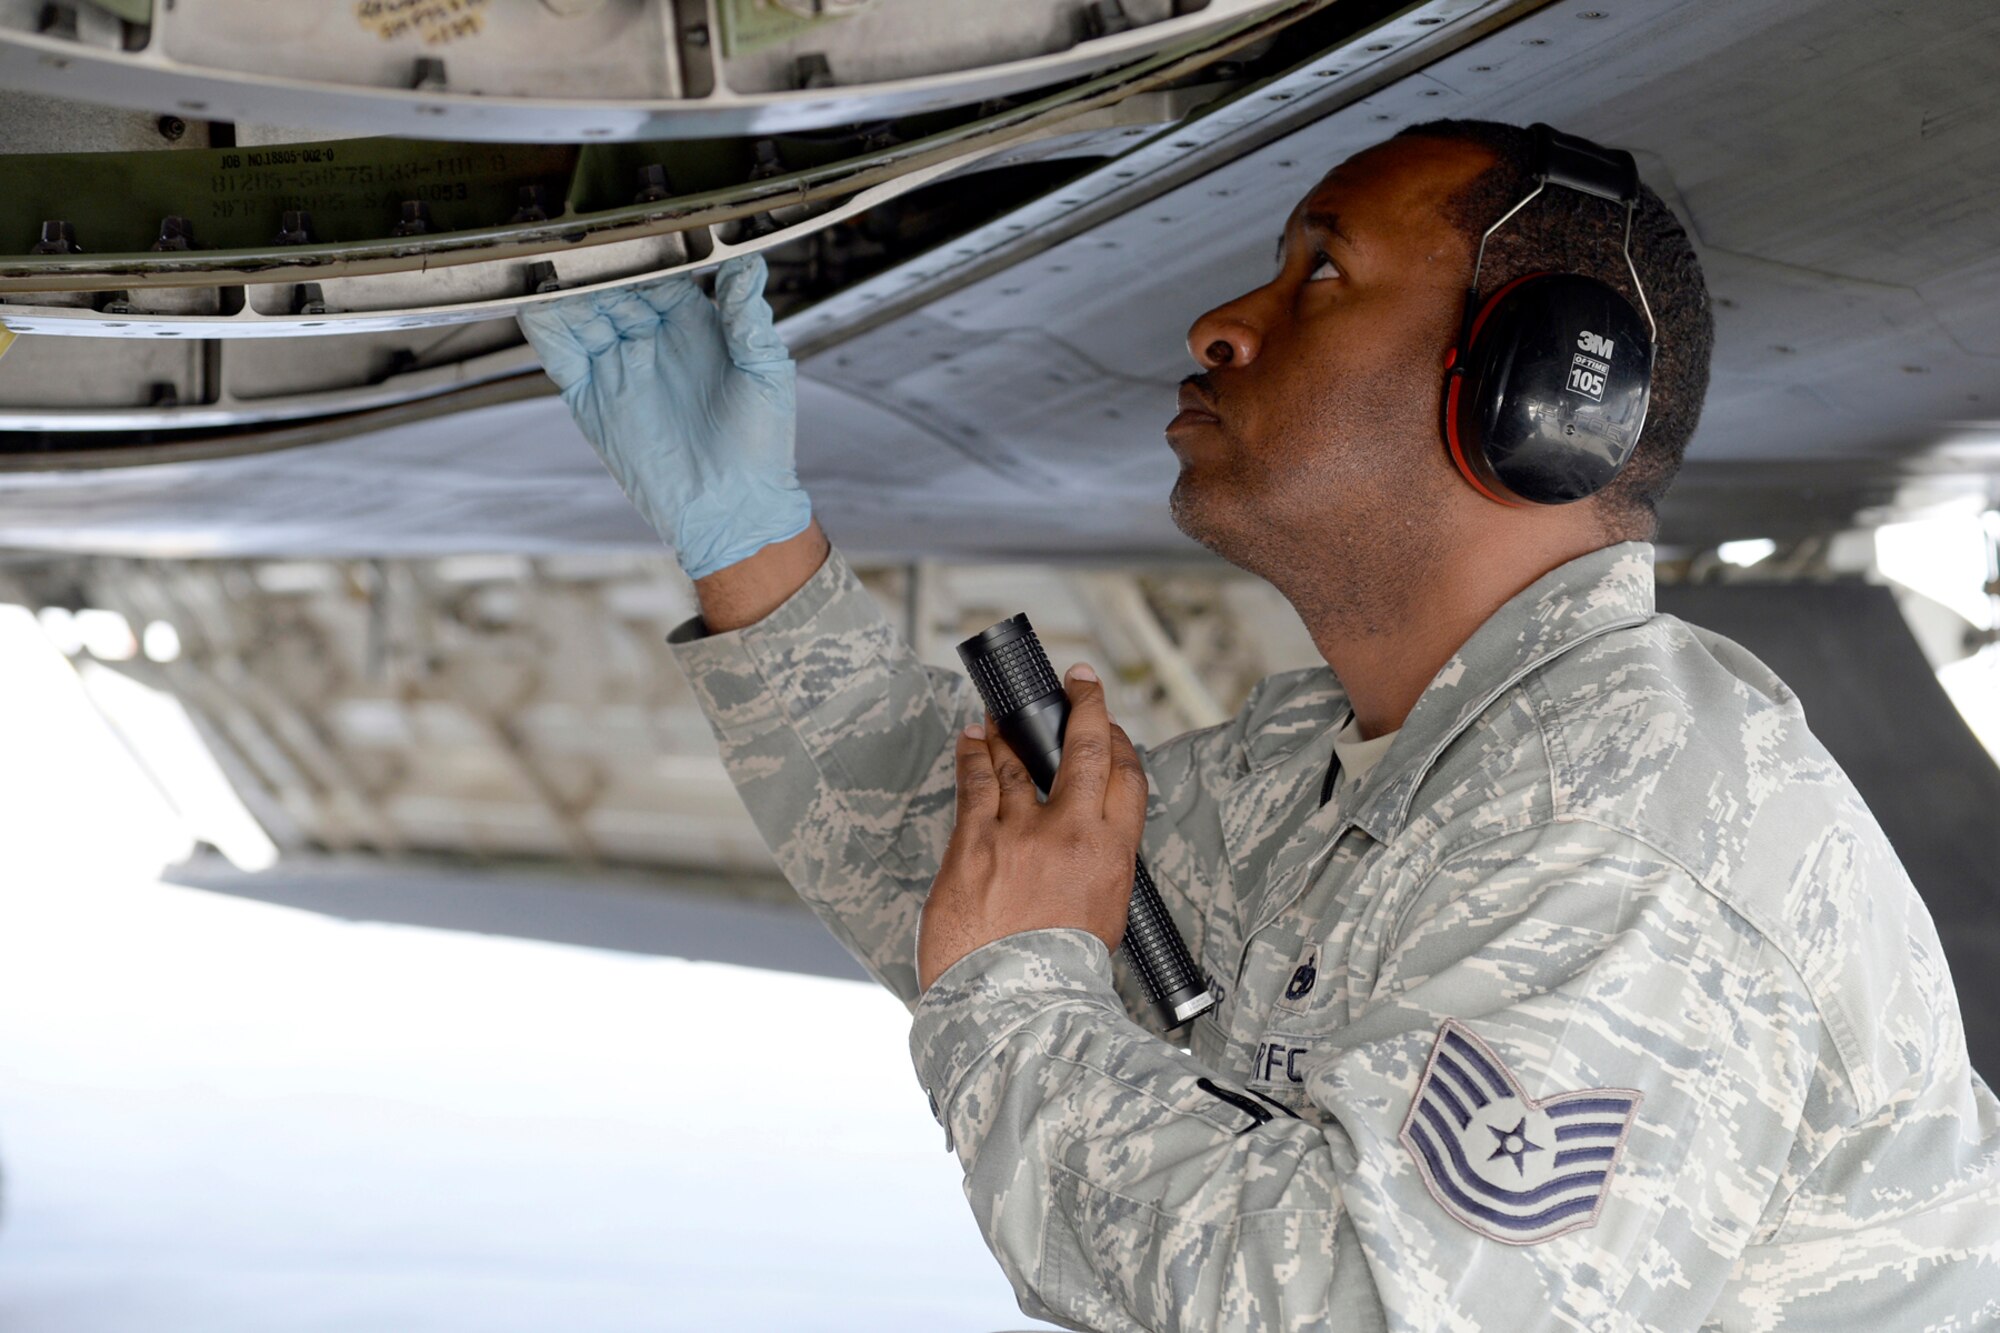 Tech. Sgt. Lawrence, Quality Assurance inspector, performs a Key Task Listing inspection on an F-22 Raptor engine at an undisclosed location in Southwest Asia Feb. 18, 2015. QA is also responsible for the foreign object damage awareness and dropped object prevention program at two other locations in our area of responsibility. Lawrence is currently deployed from Tyndall Air Force Base, Fla., and is a native of Detroit, Mich. (U.S. Air Force photo/Tech. Sgt. Marie Brown)